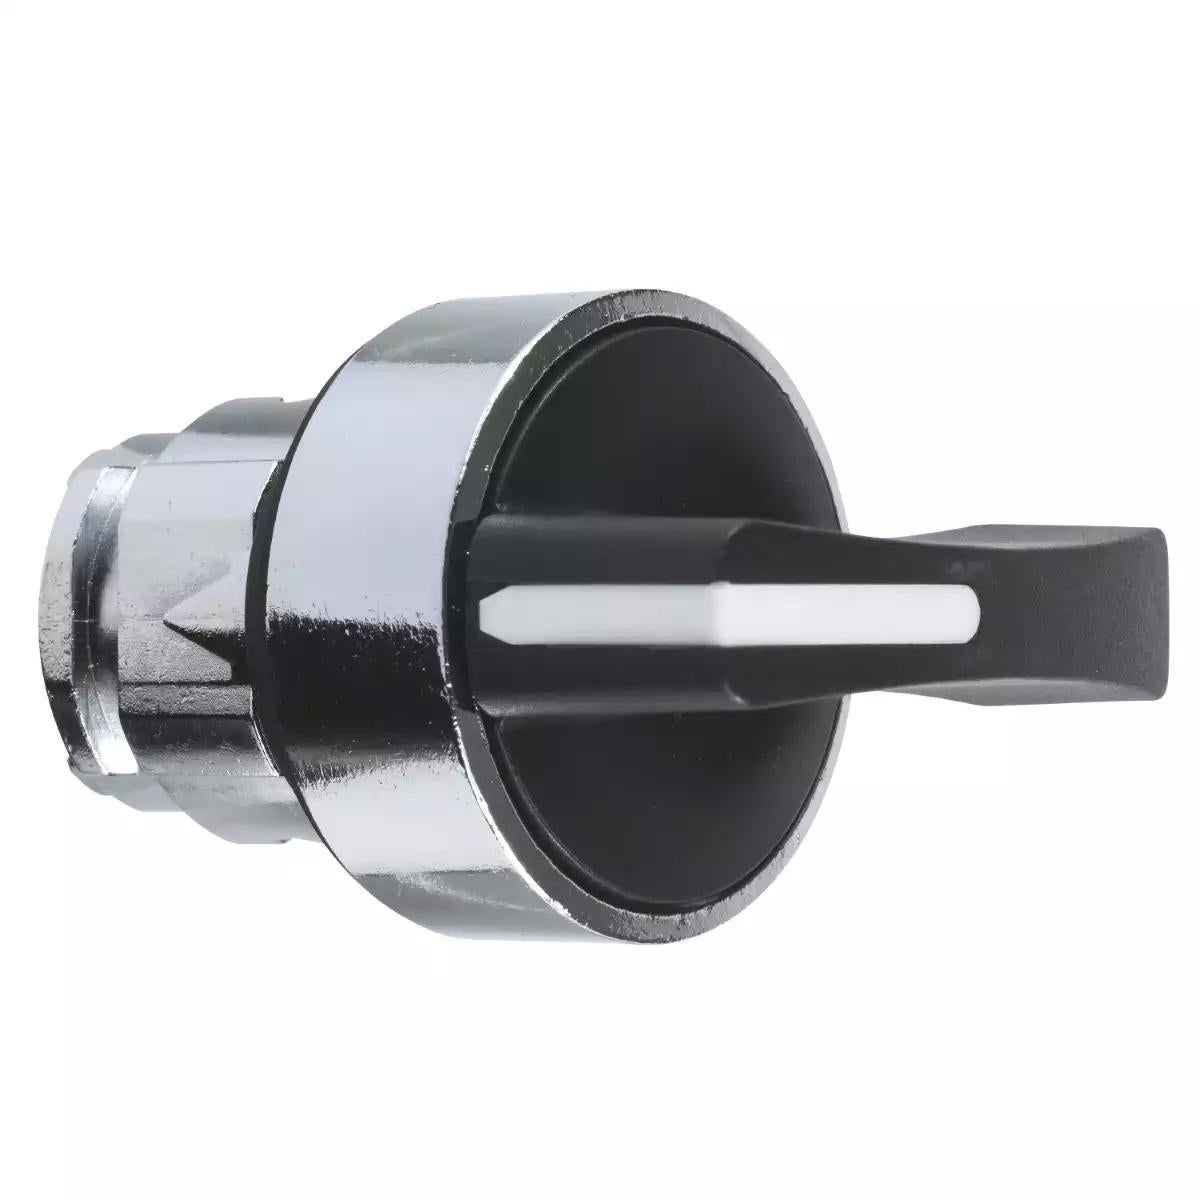 Selector switch head, Harmony XB4, metal, black, 22mm, long handle, 3 positions, spring return to center